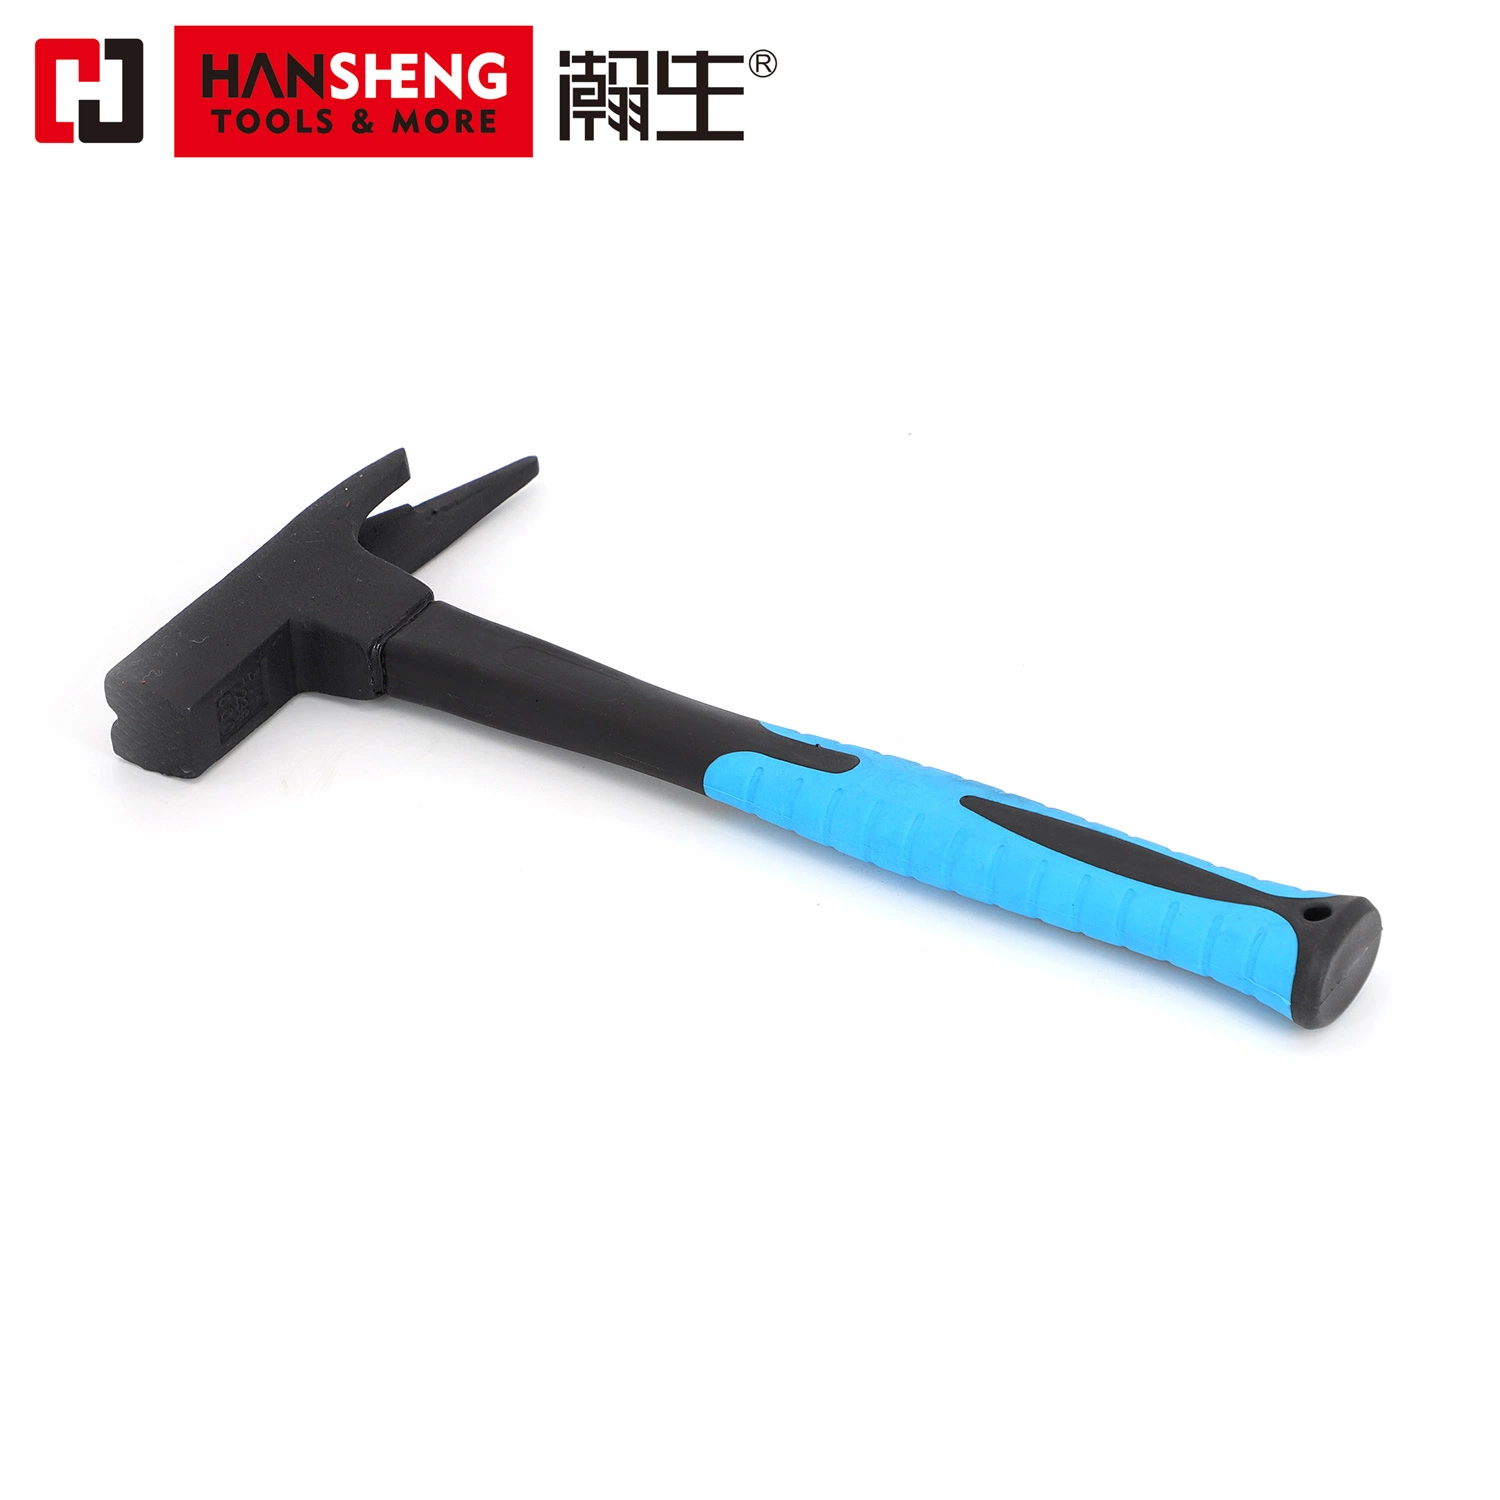 Professional Hand Tools, Hardware Tools, Made of CRV, High Carbon Steel